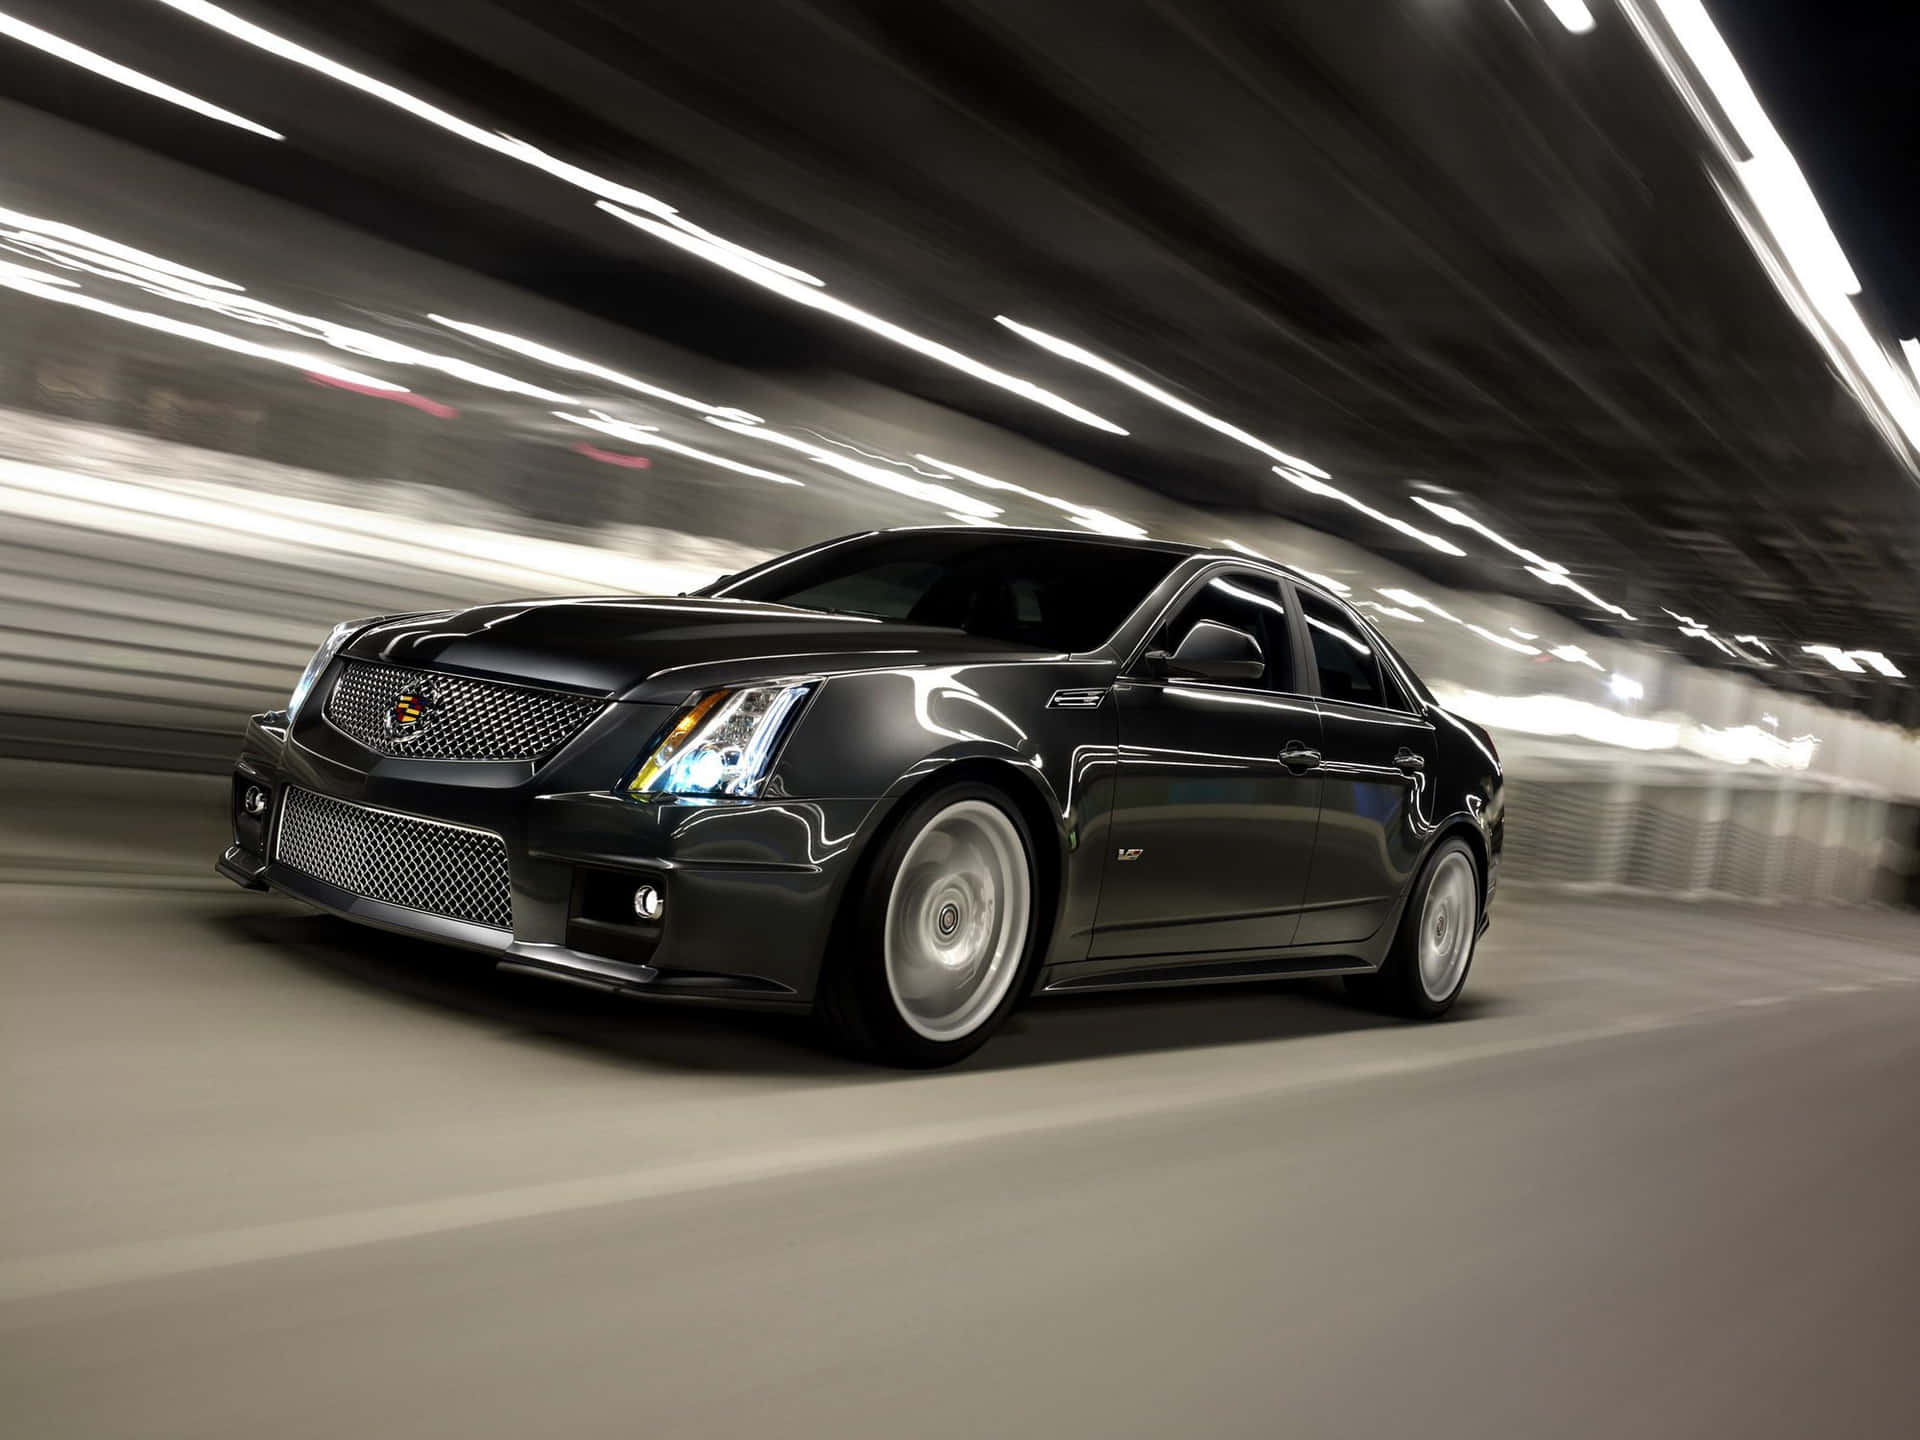 Luxurious Cadillac CTS gliding through the city streets Wallpaper